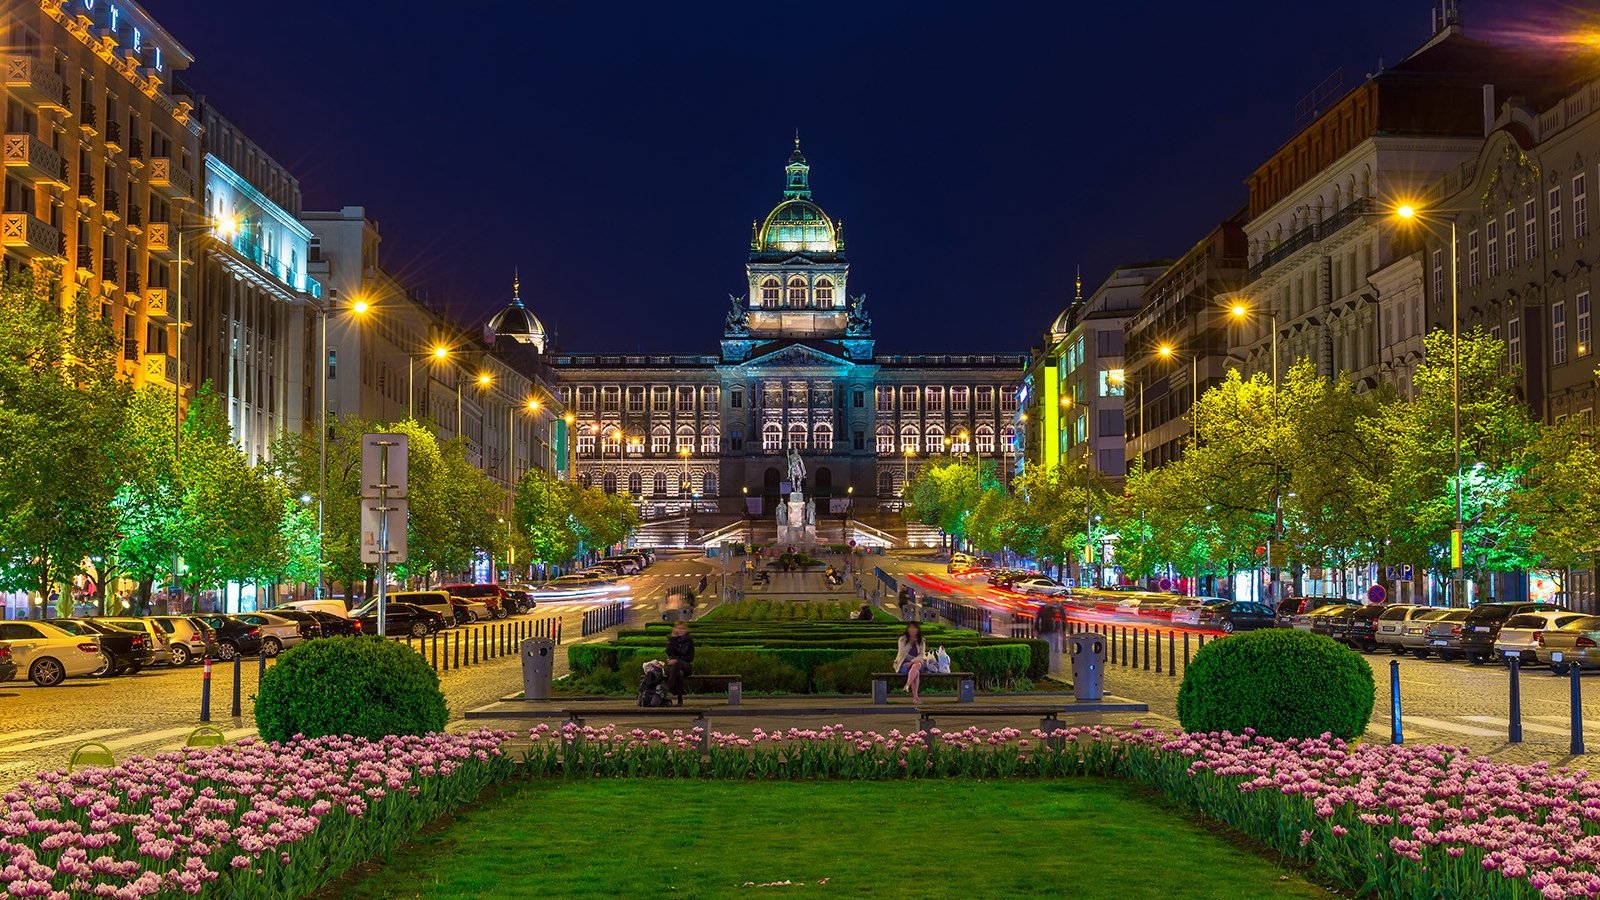 Wenceslas Square: The Centre of the Nation